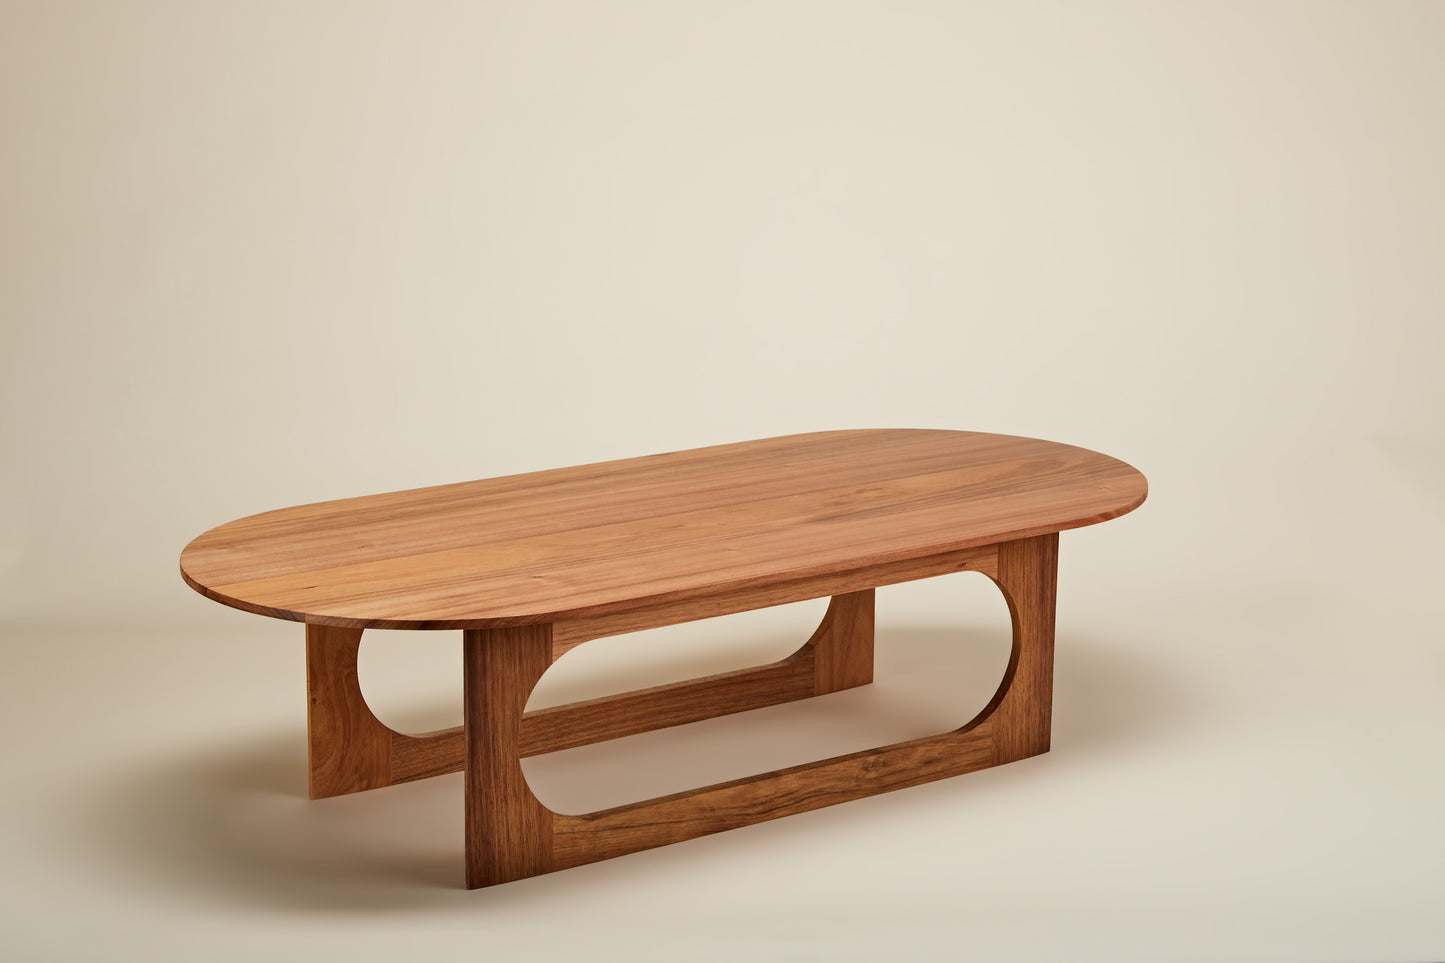 Ethos coffee table in blackwood solid timber - 1200mm long